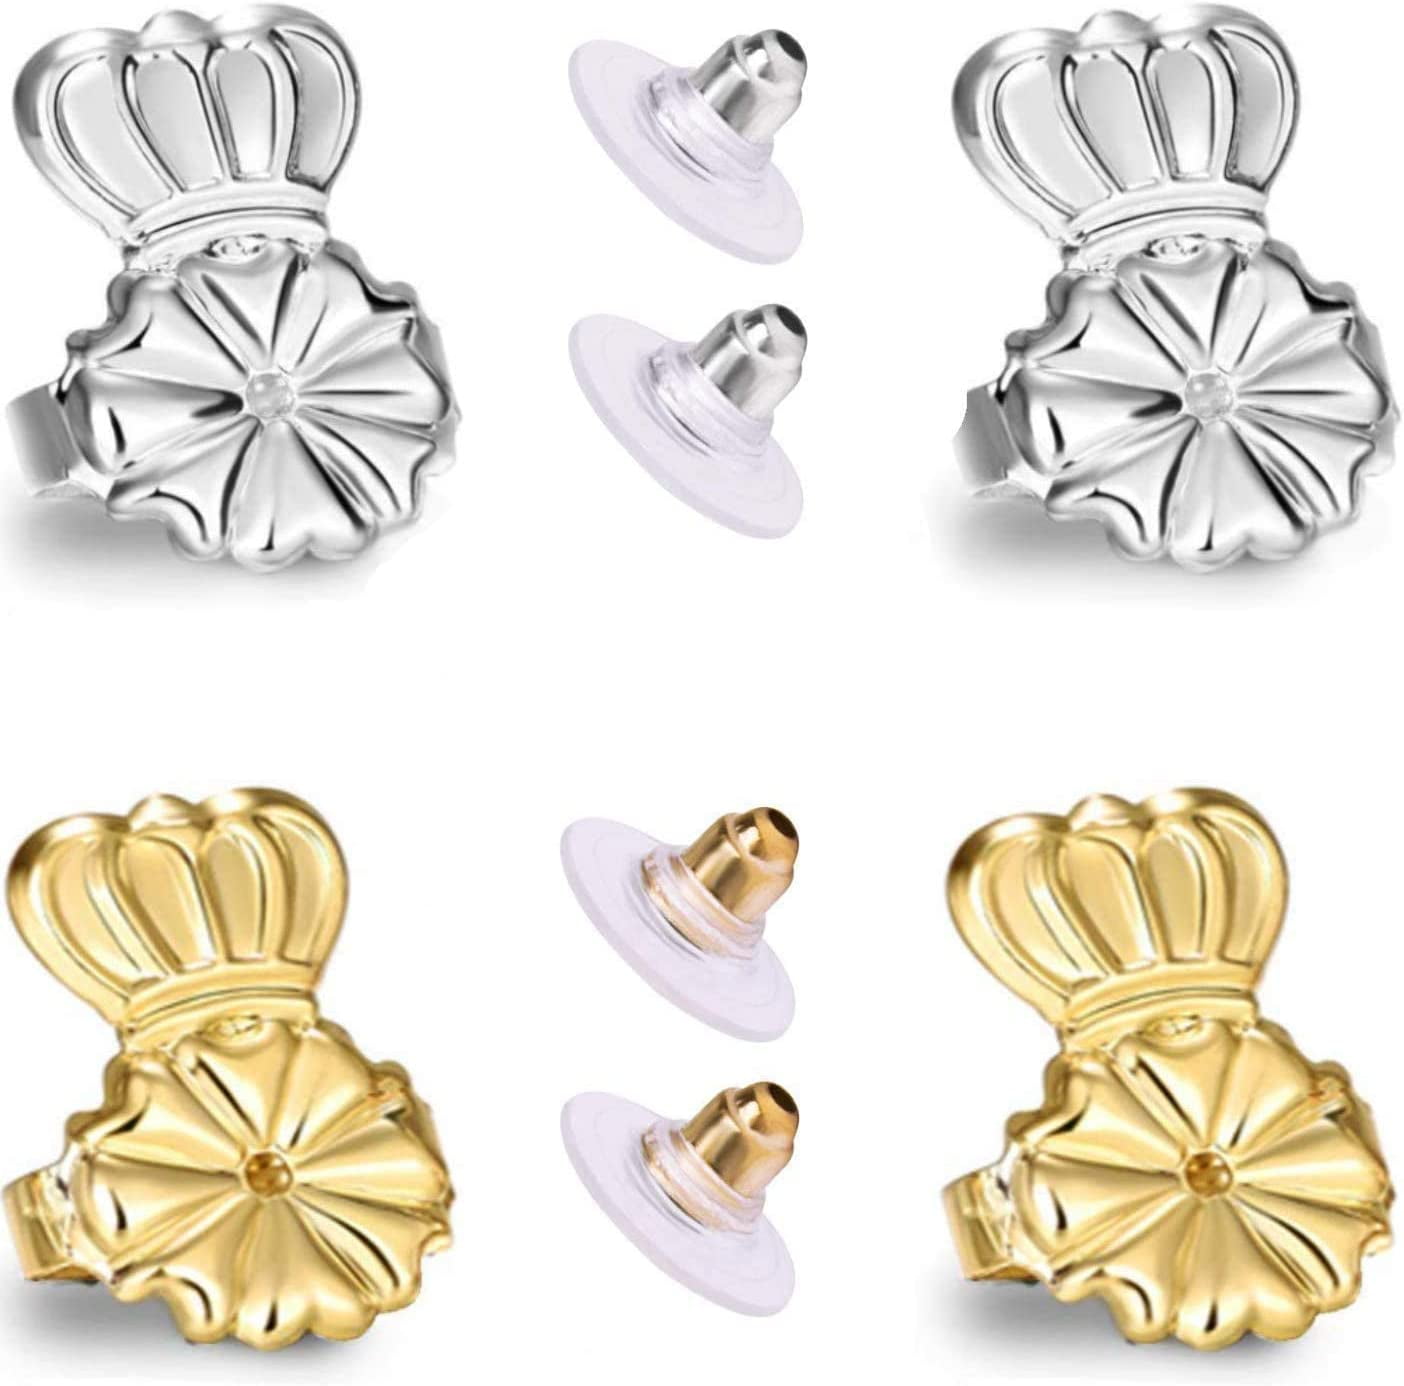 3 Pairs Magic Earring Backs For Droopy Ears, Earring Lifters For Heavy  Earring, Earing Lifter Backs